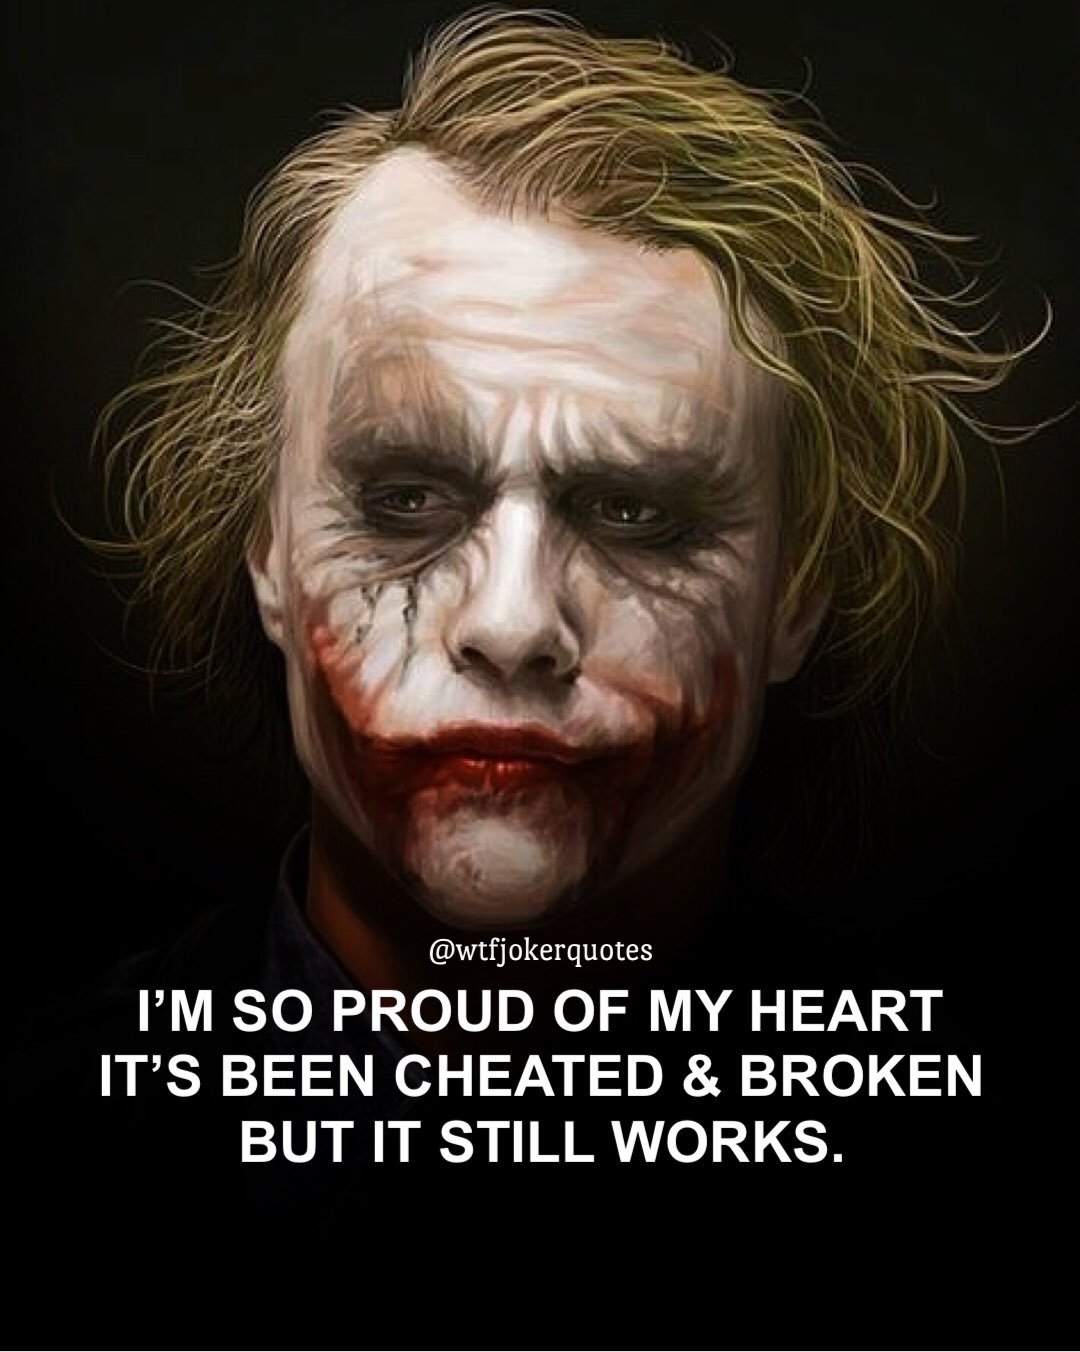 Joker S Quotes I M So Proud Of My Heart It S Been Cheated And Broken But It Still Works T Co 27kjyl3q4j Twitter